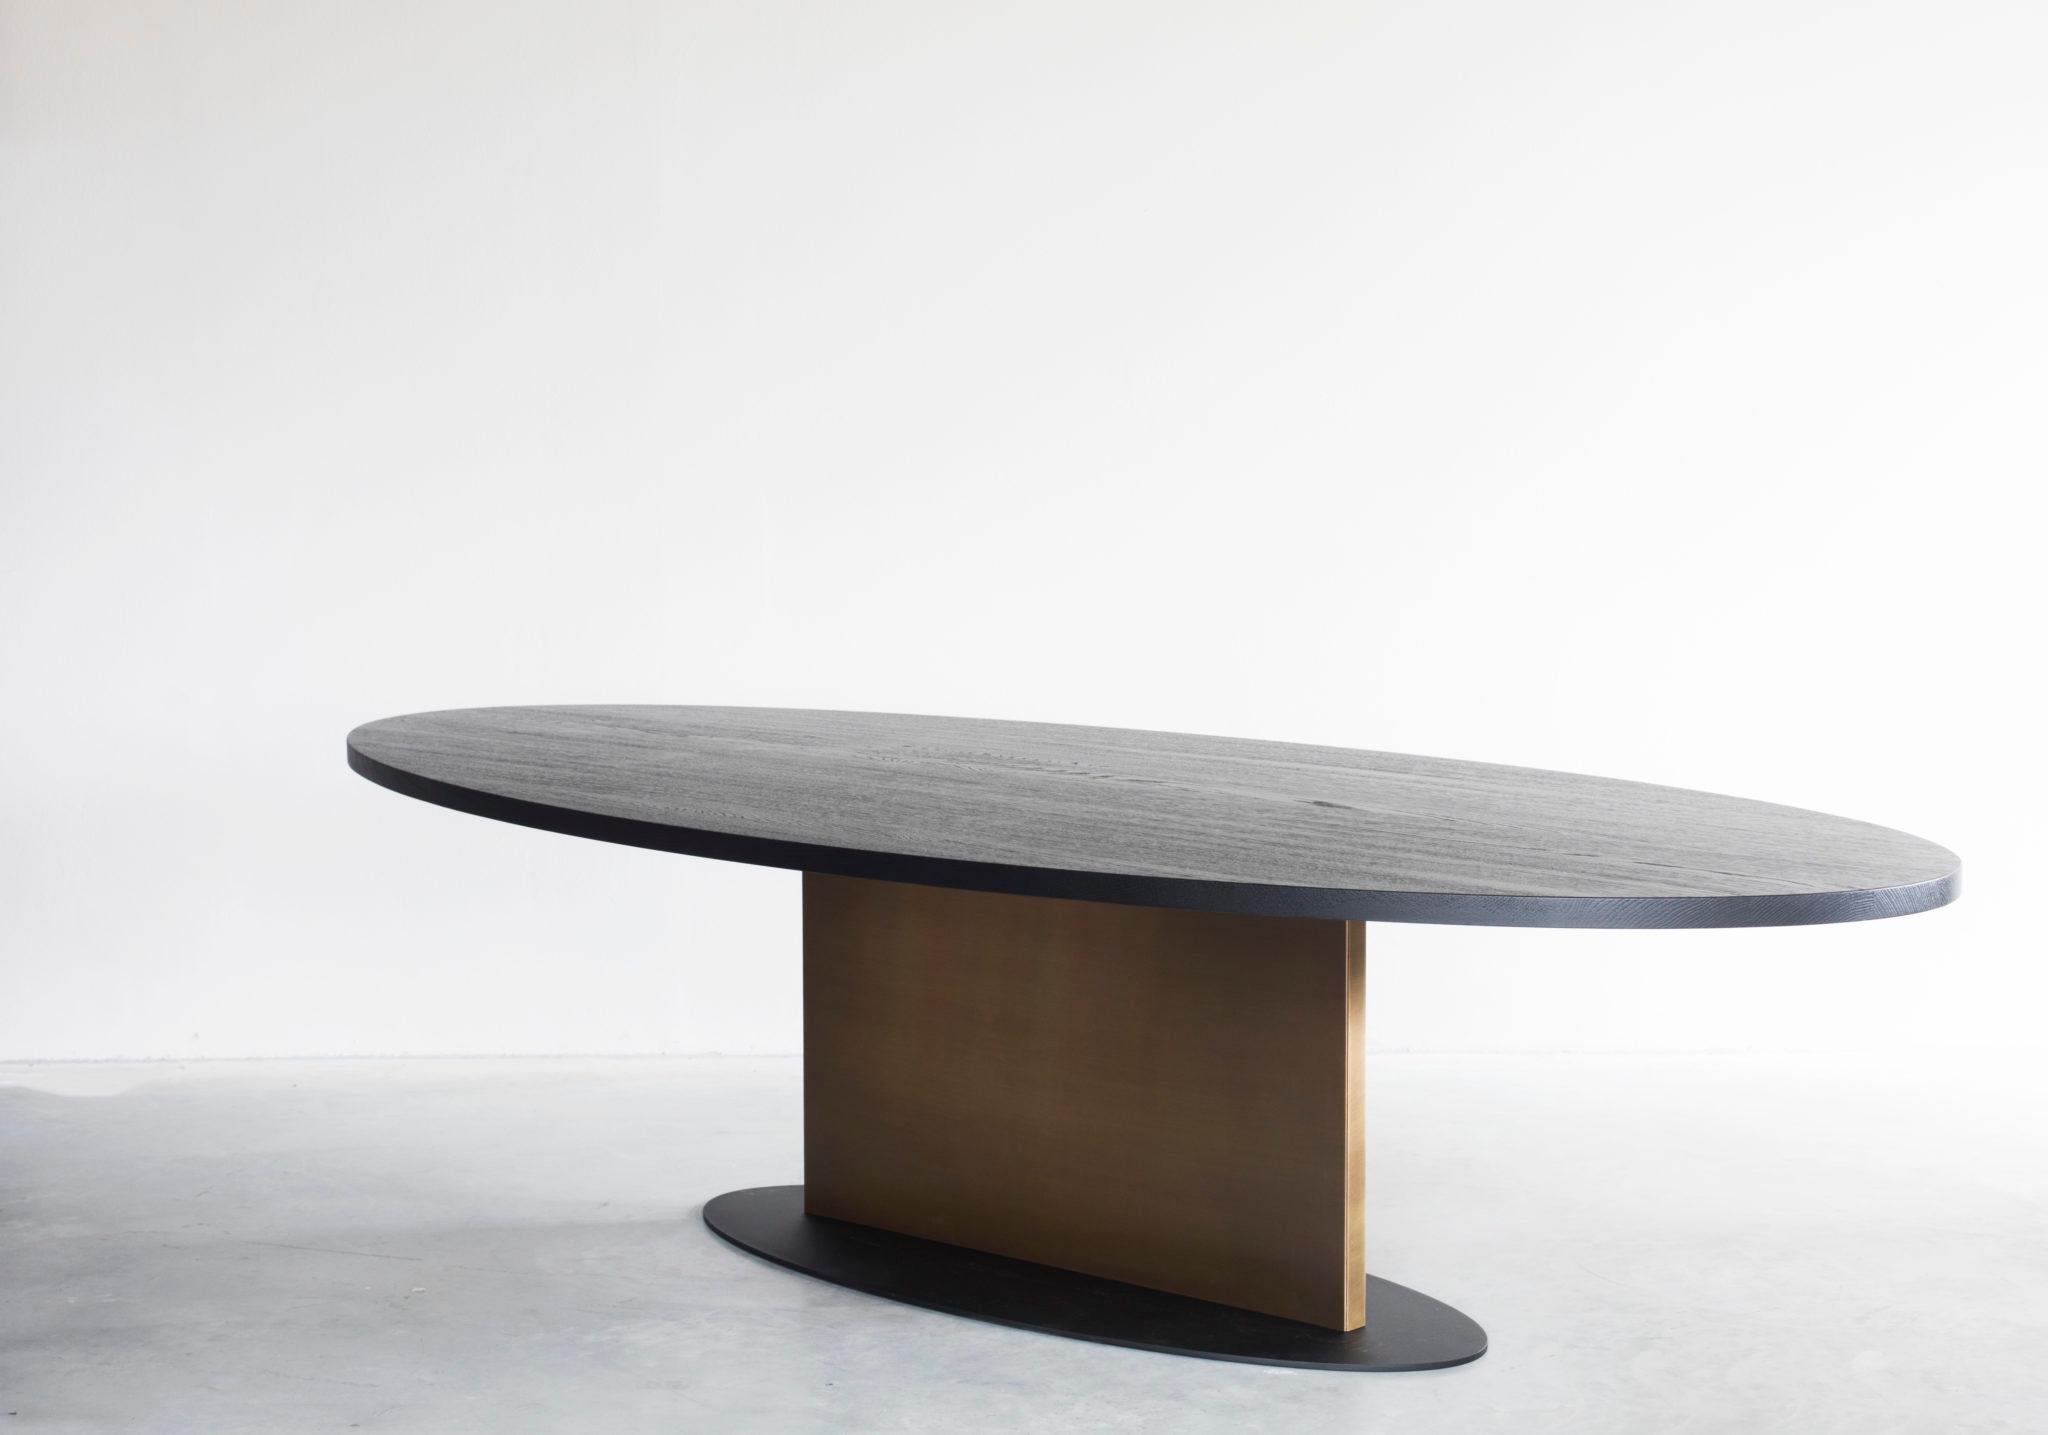 Opium oval table with brass detail by Van Rossum
Dimensions: D240 x W120 x H75 cm
Materials: Oak, brass, steel.

The wood is available in all standard Van Rossum colors, or in a matching finish to customer’s own sample.
Detailing is available